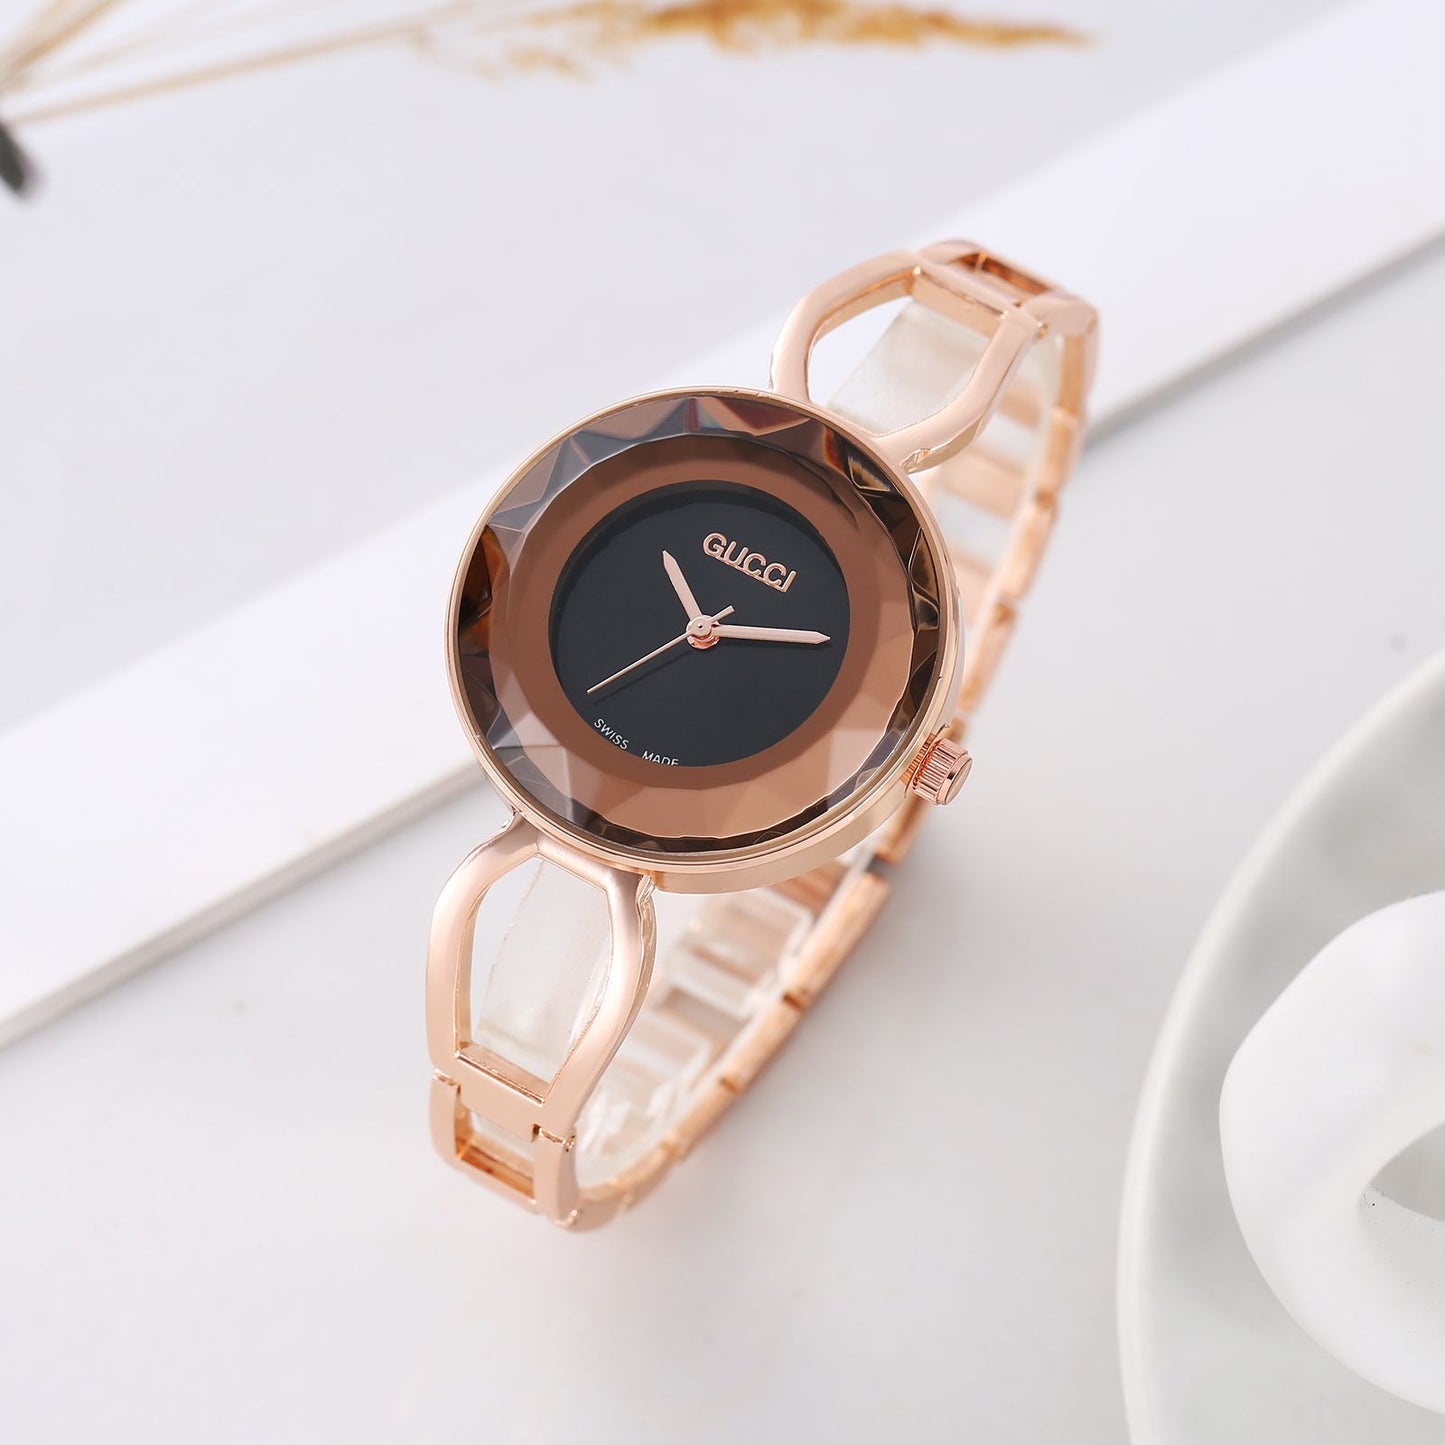 Gucci Rose Gold Color Watch With Black Dial With Brown Shade Color Crystal Case Watch For Woman Or Girl Gold Strap Watch GC-6543